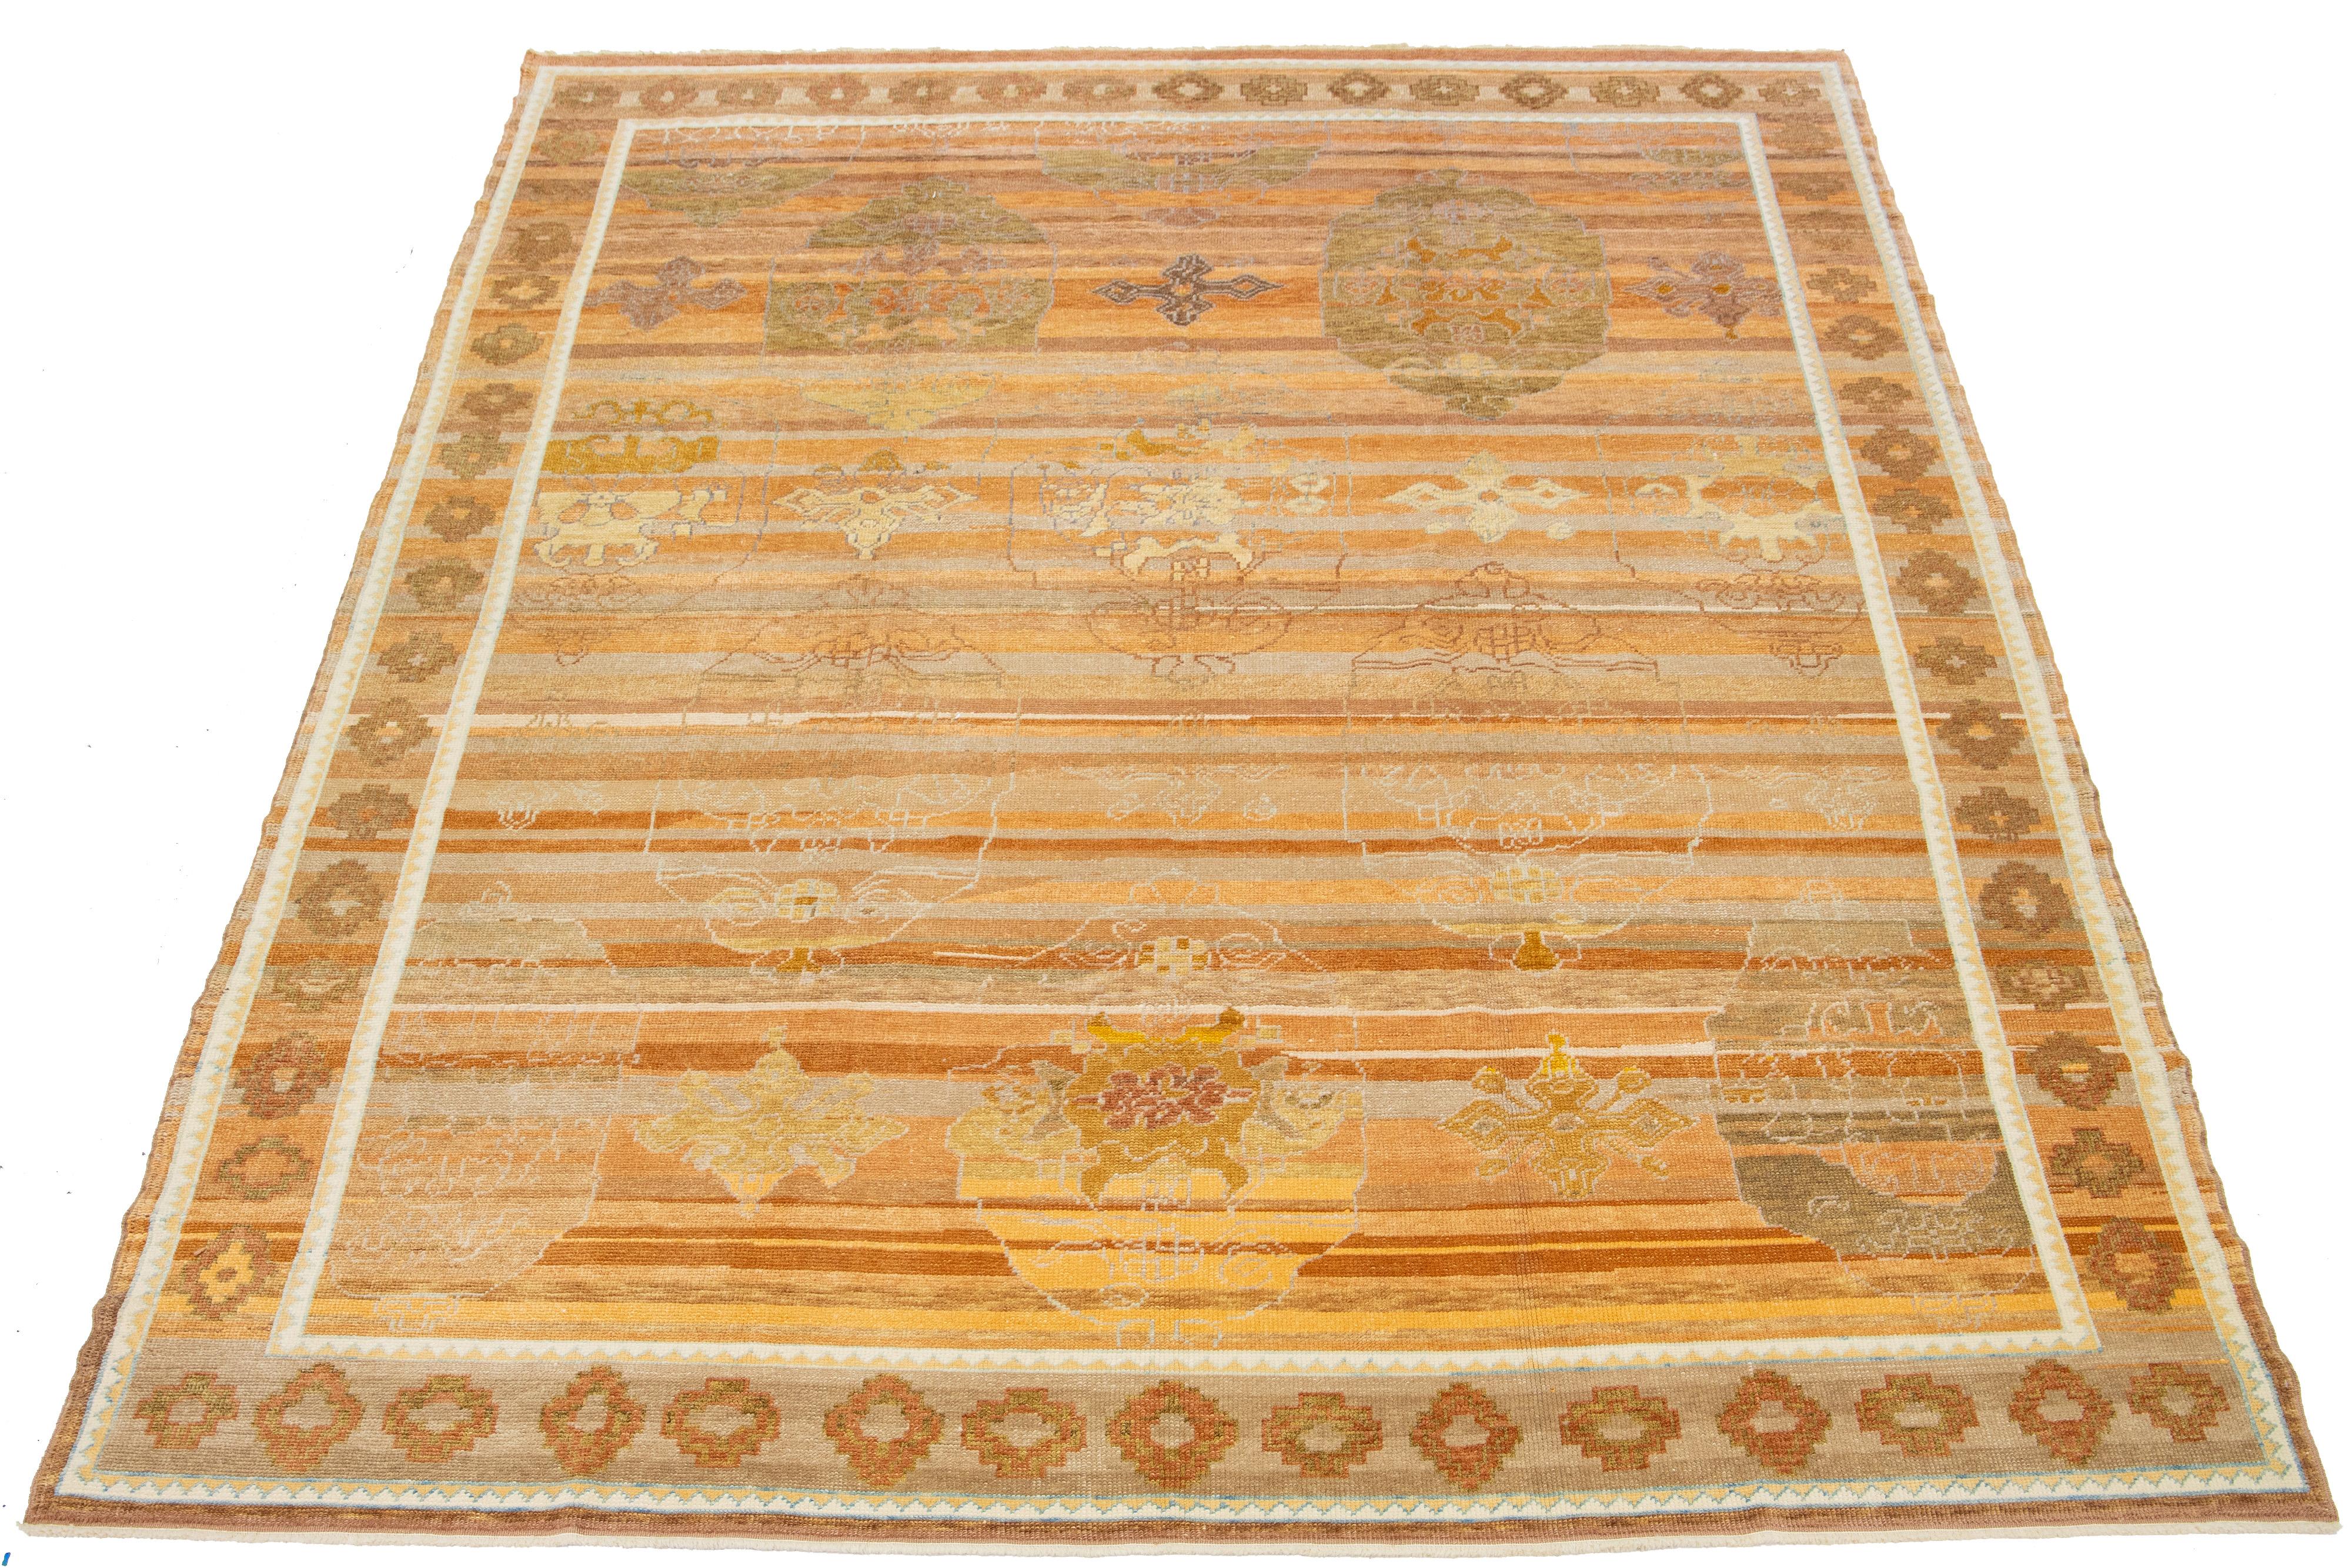 Beautiful contemporary Turkish Oushak rug, made of hand-knotted wool, featuring an orange field with accents of brown and gold in an all-over geometric design.

This rug measures 9'4” x 13'.

Our rugs are professionally cleaned before shipping.